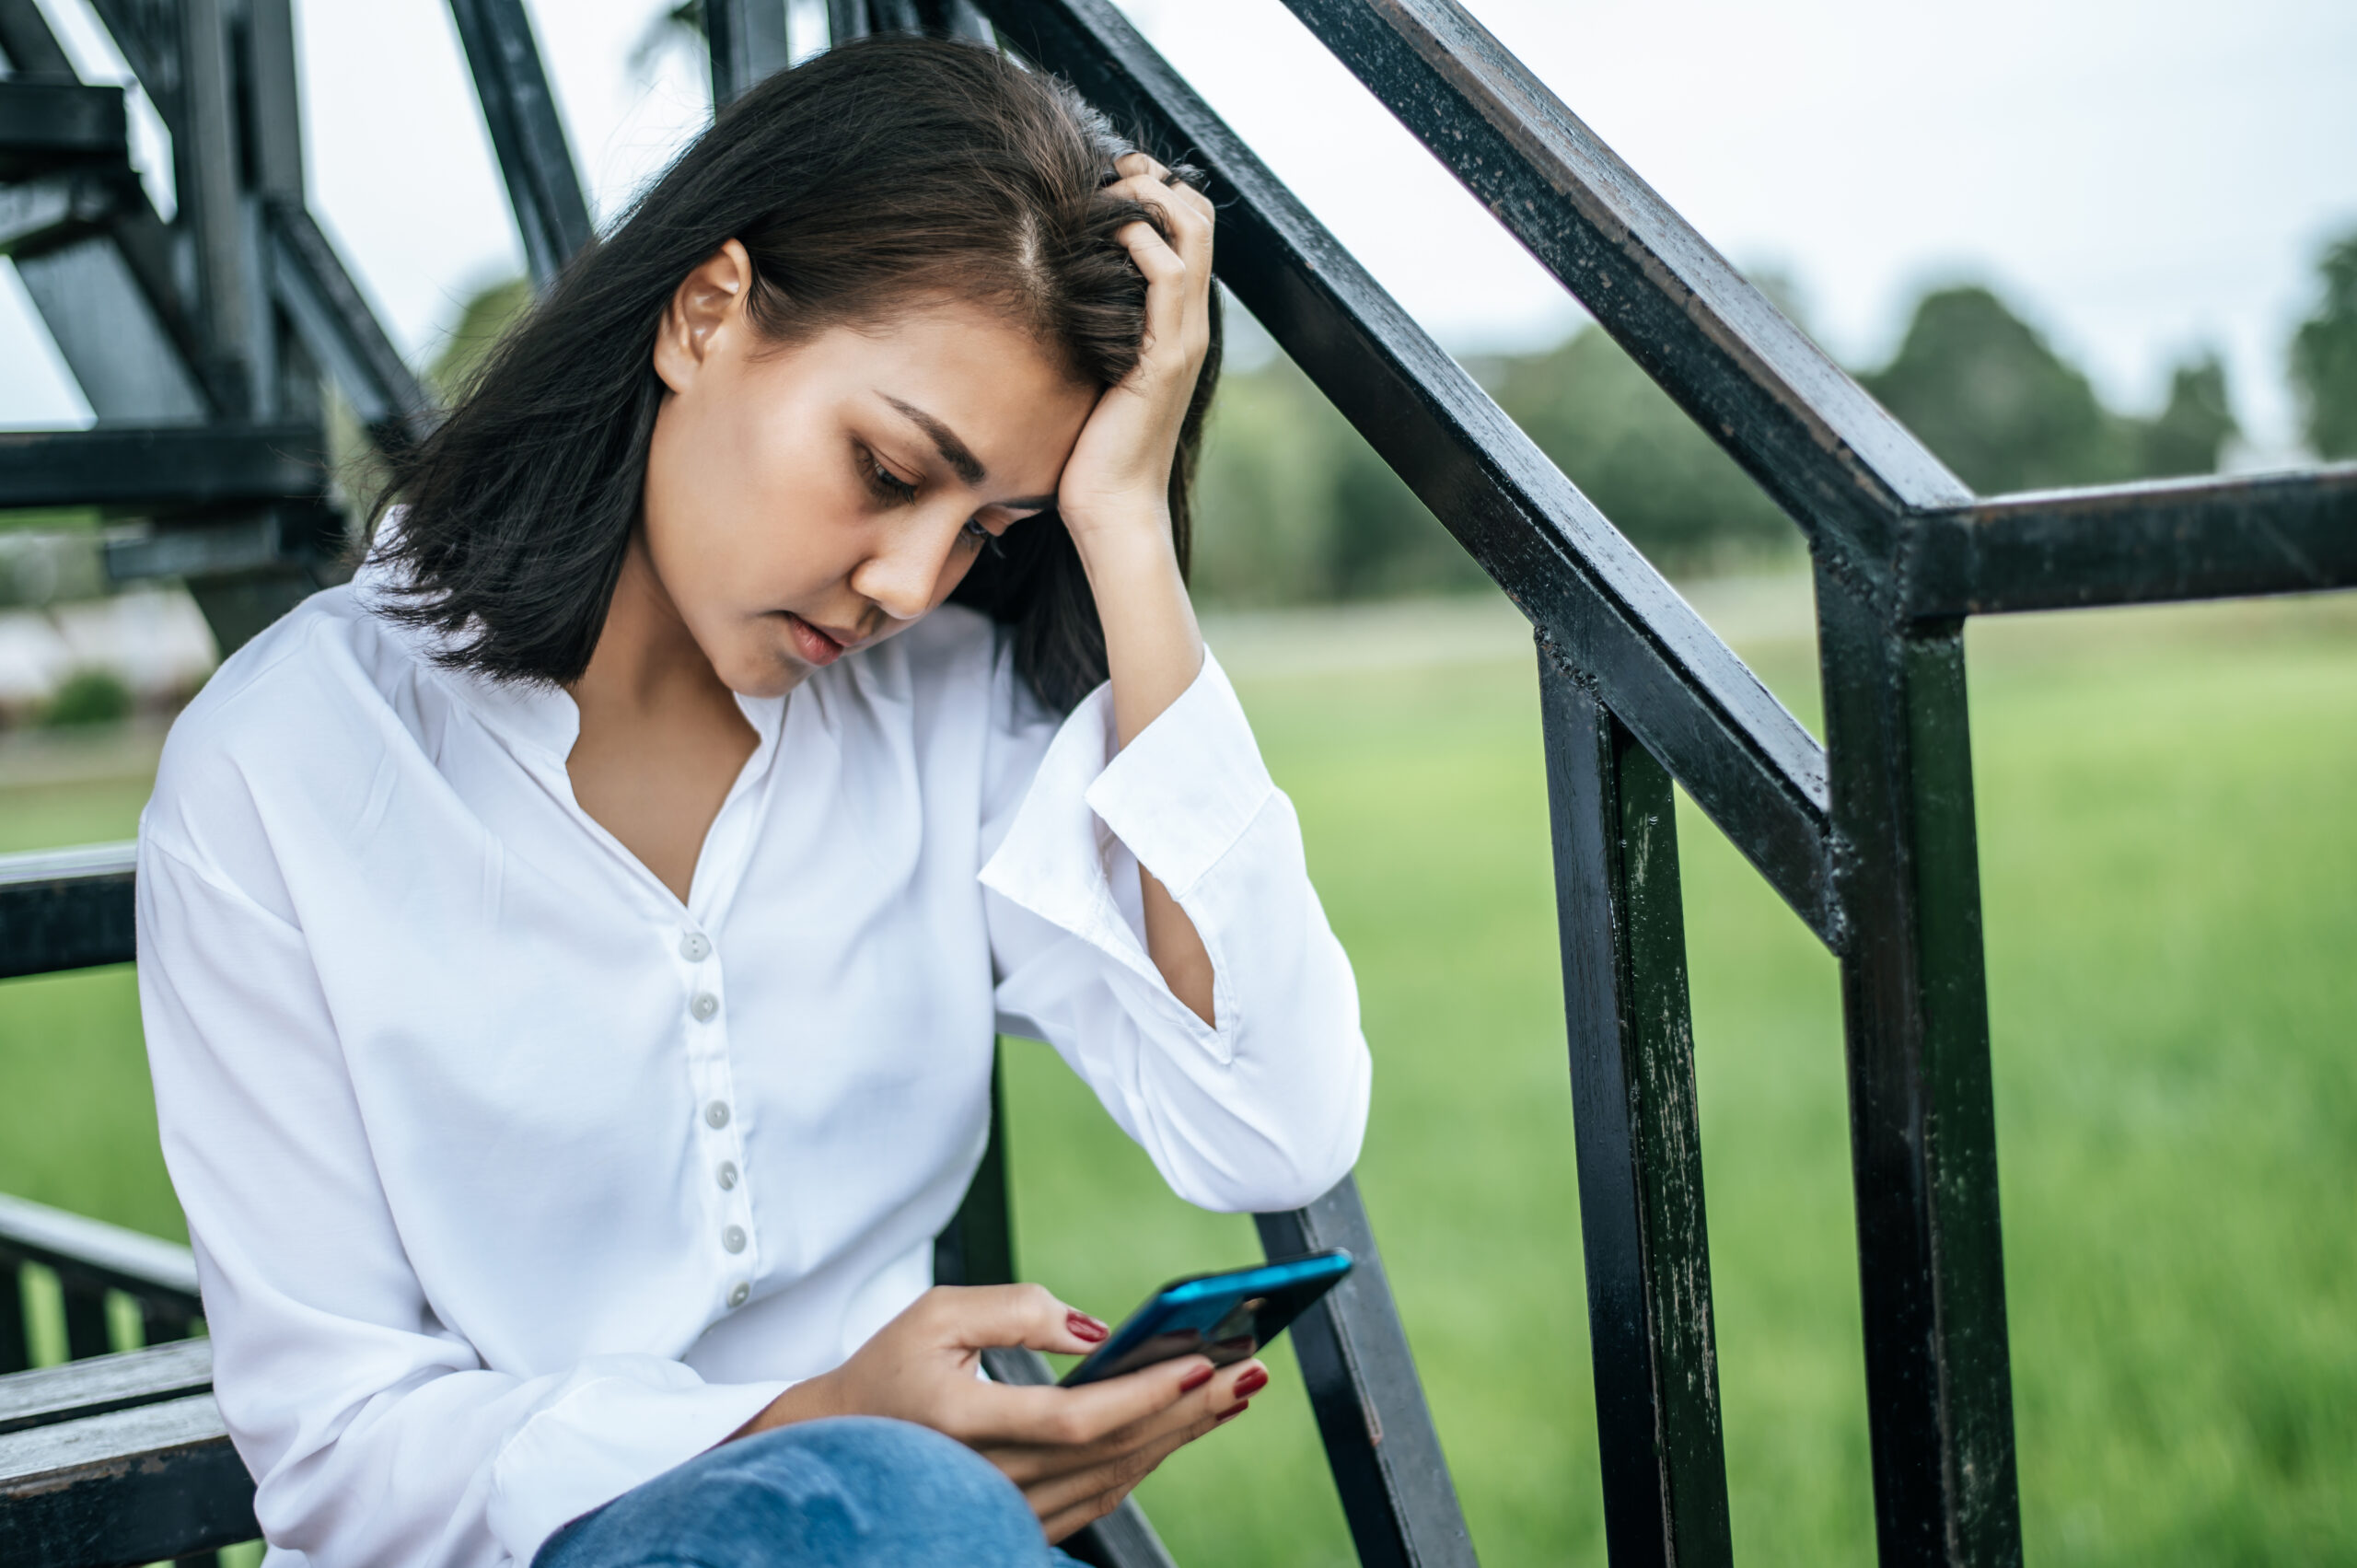 Stressed woman sitting on a ladder looking at a smart phone